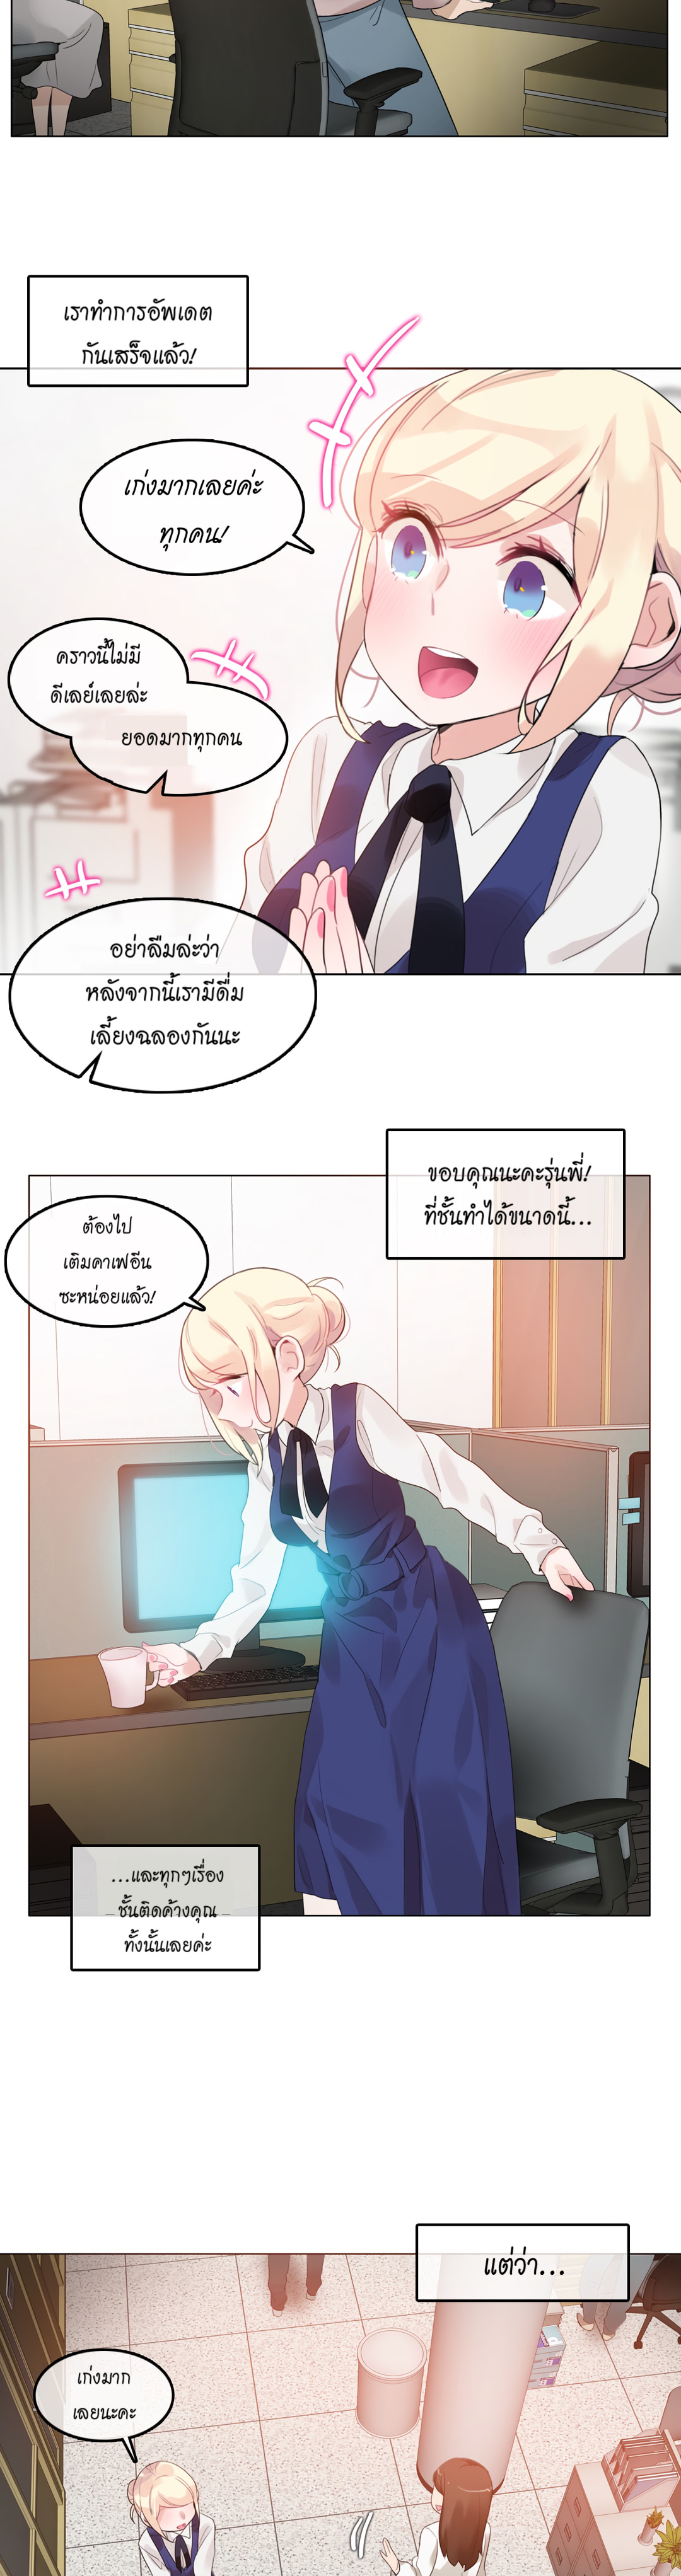 A Pervert’s Daily Life55 (2)